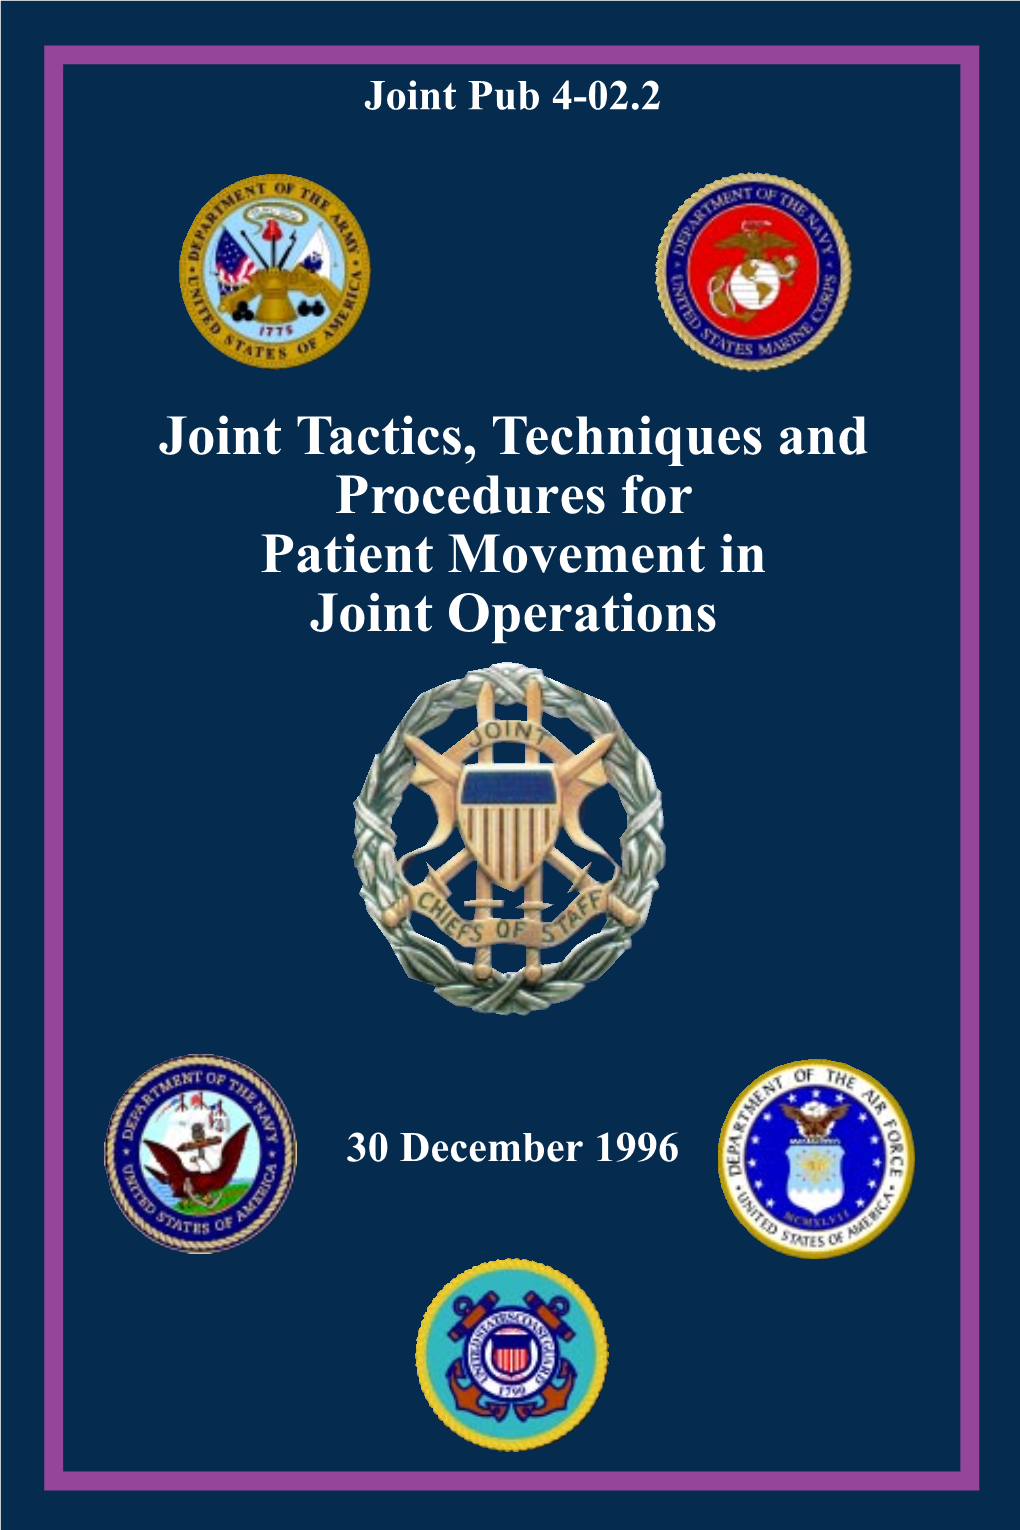 JP 4-02.2 JTTP for Patient Movement in Joint Operations, 30 Dec 1996